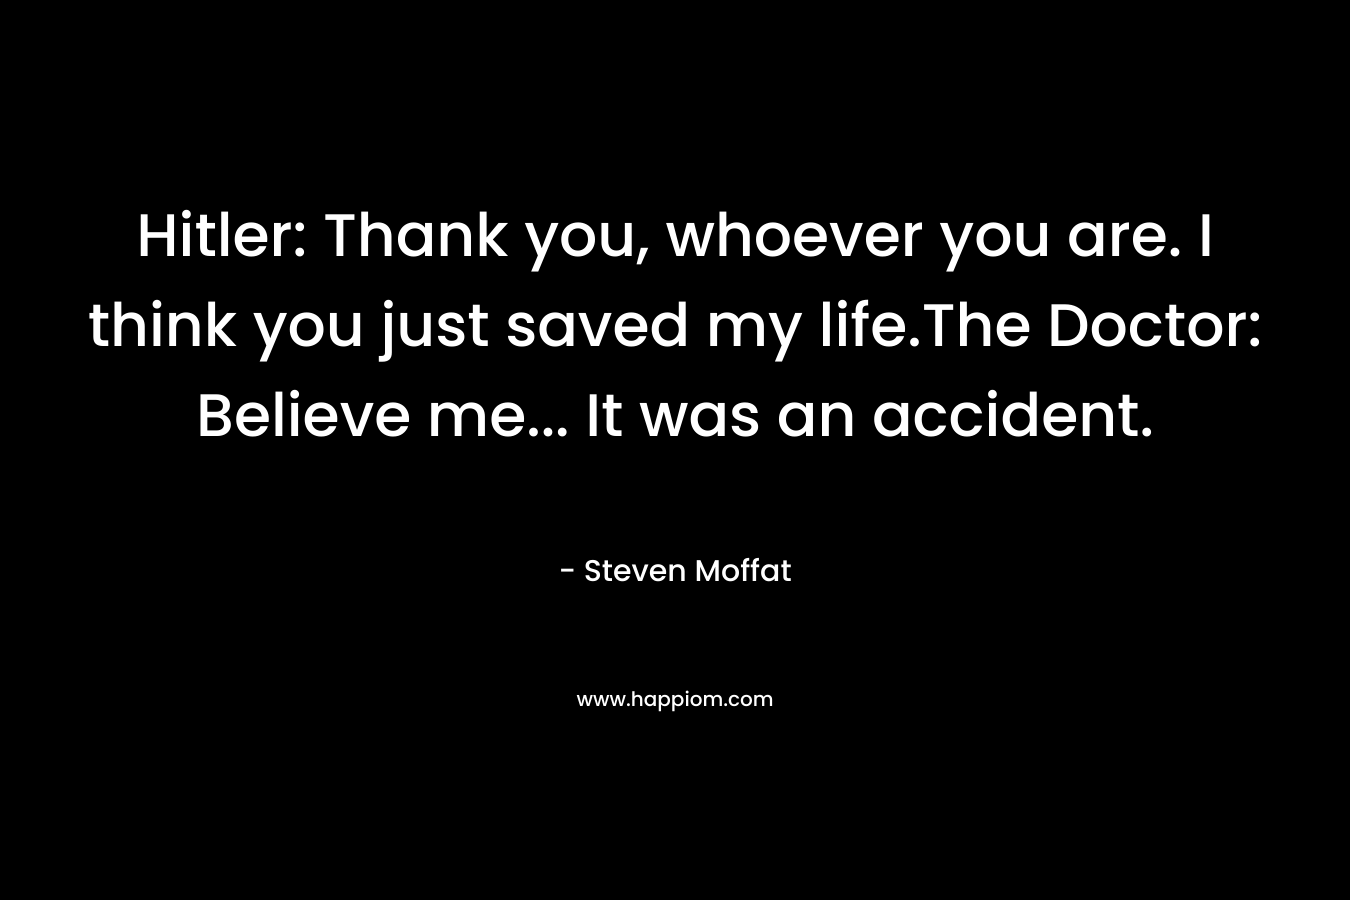 Hitler: Thank you, whoever you are. I think you just saved my life.The Doctor: Believe me... It was an accident.